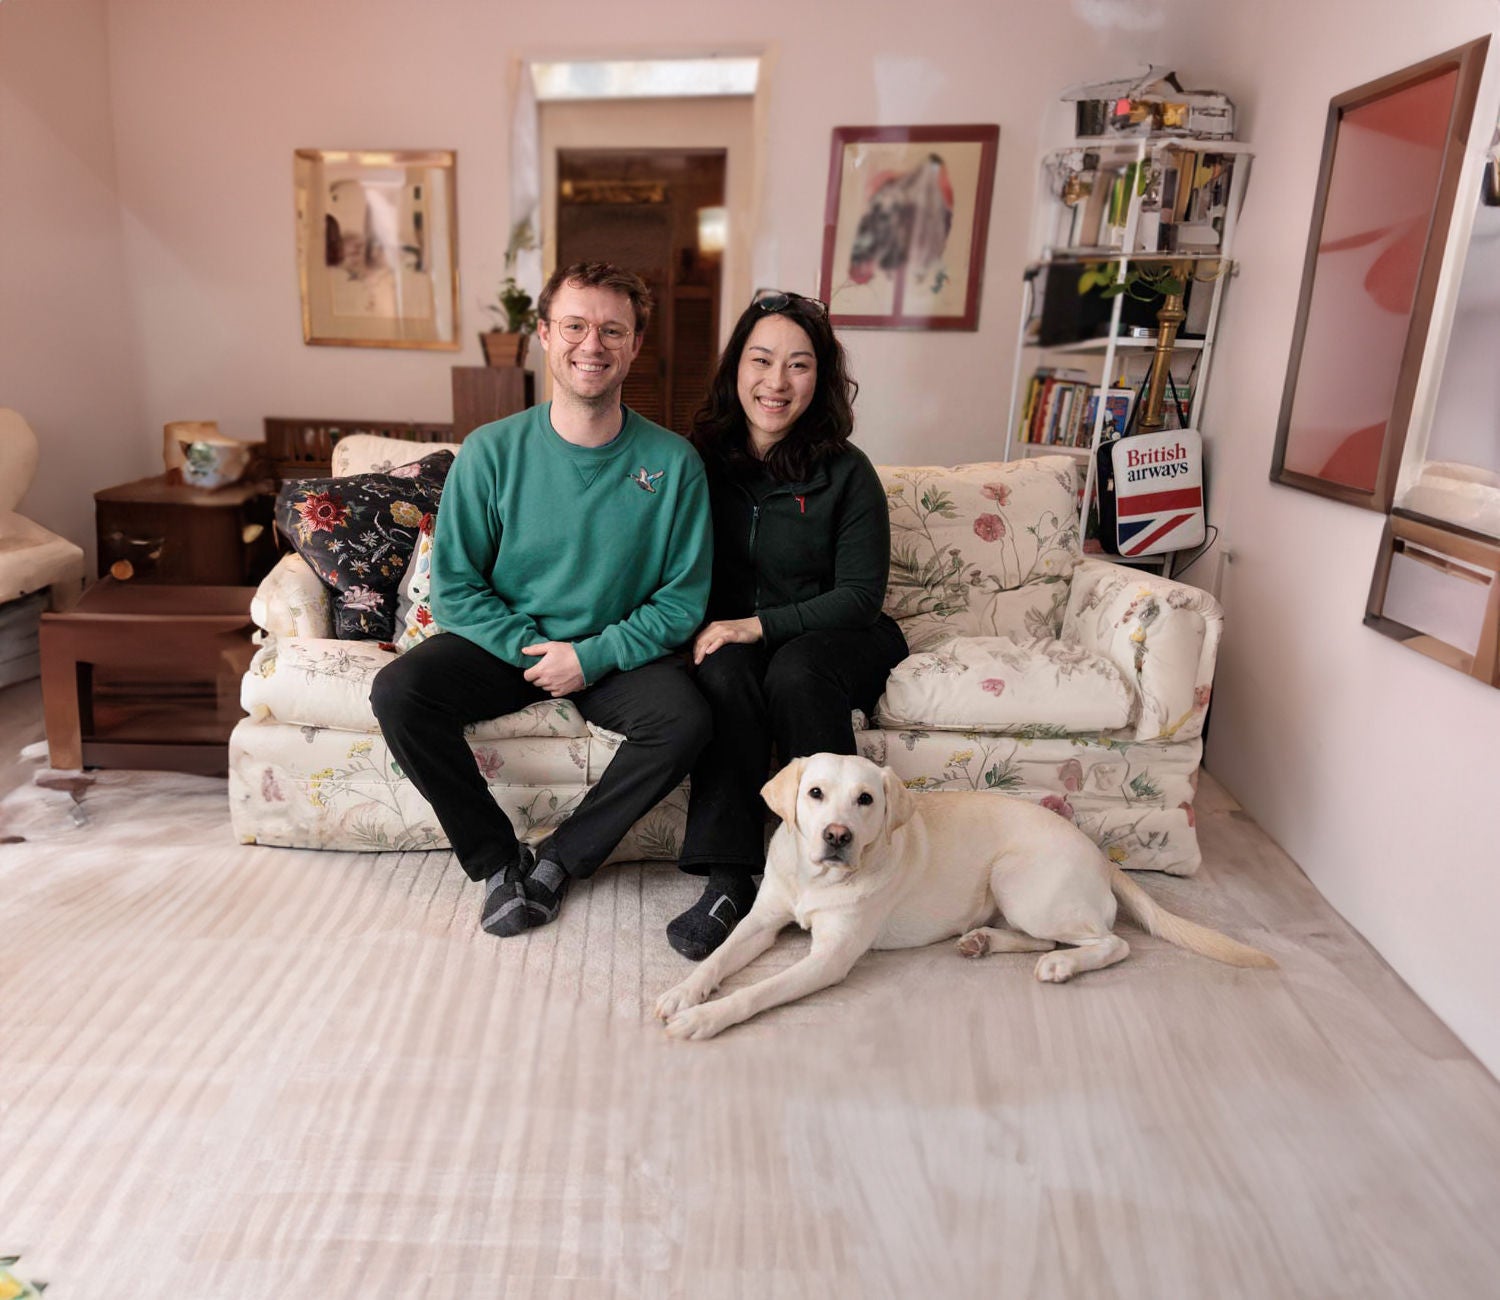 Couple sitting on a couch with a dog at their feet